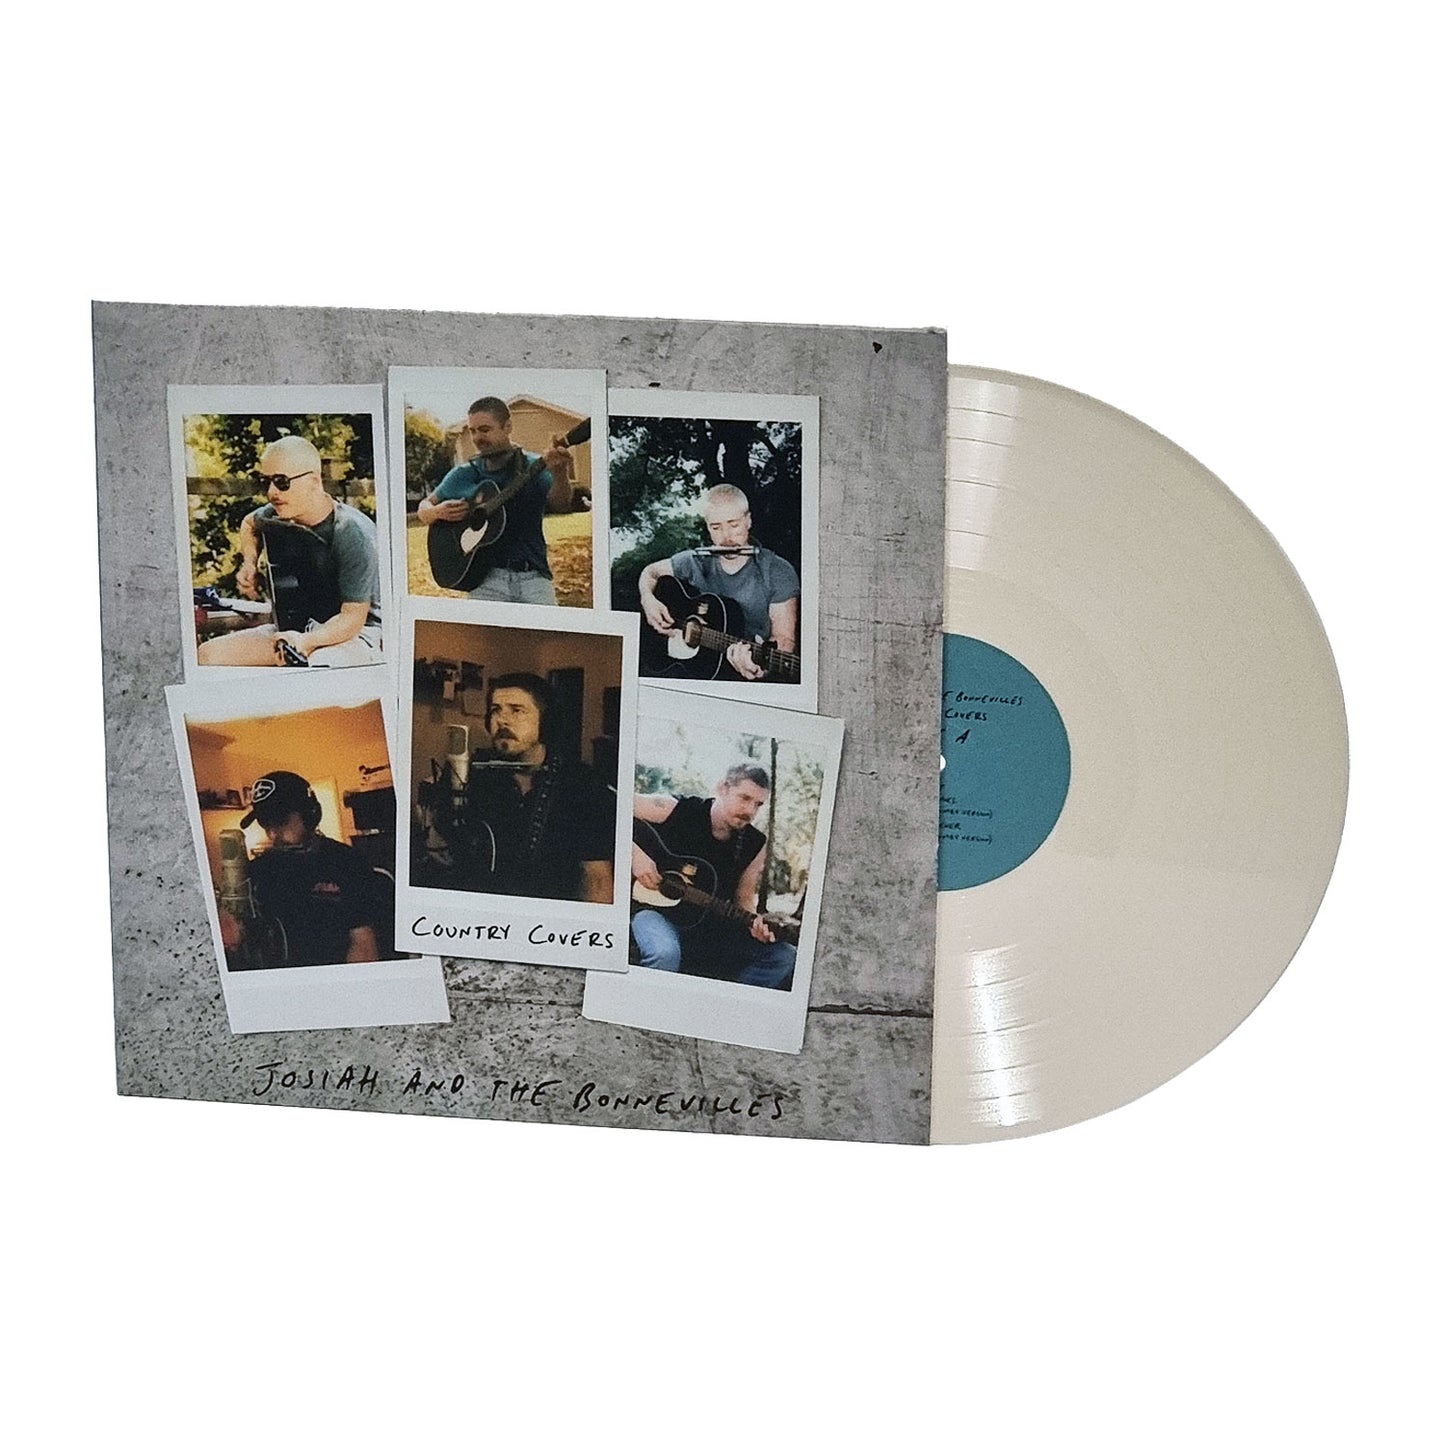 Country Covers Vinyl LP (Limited Cream Color)